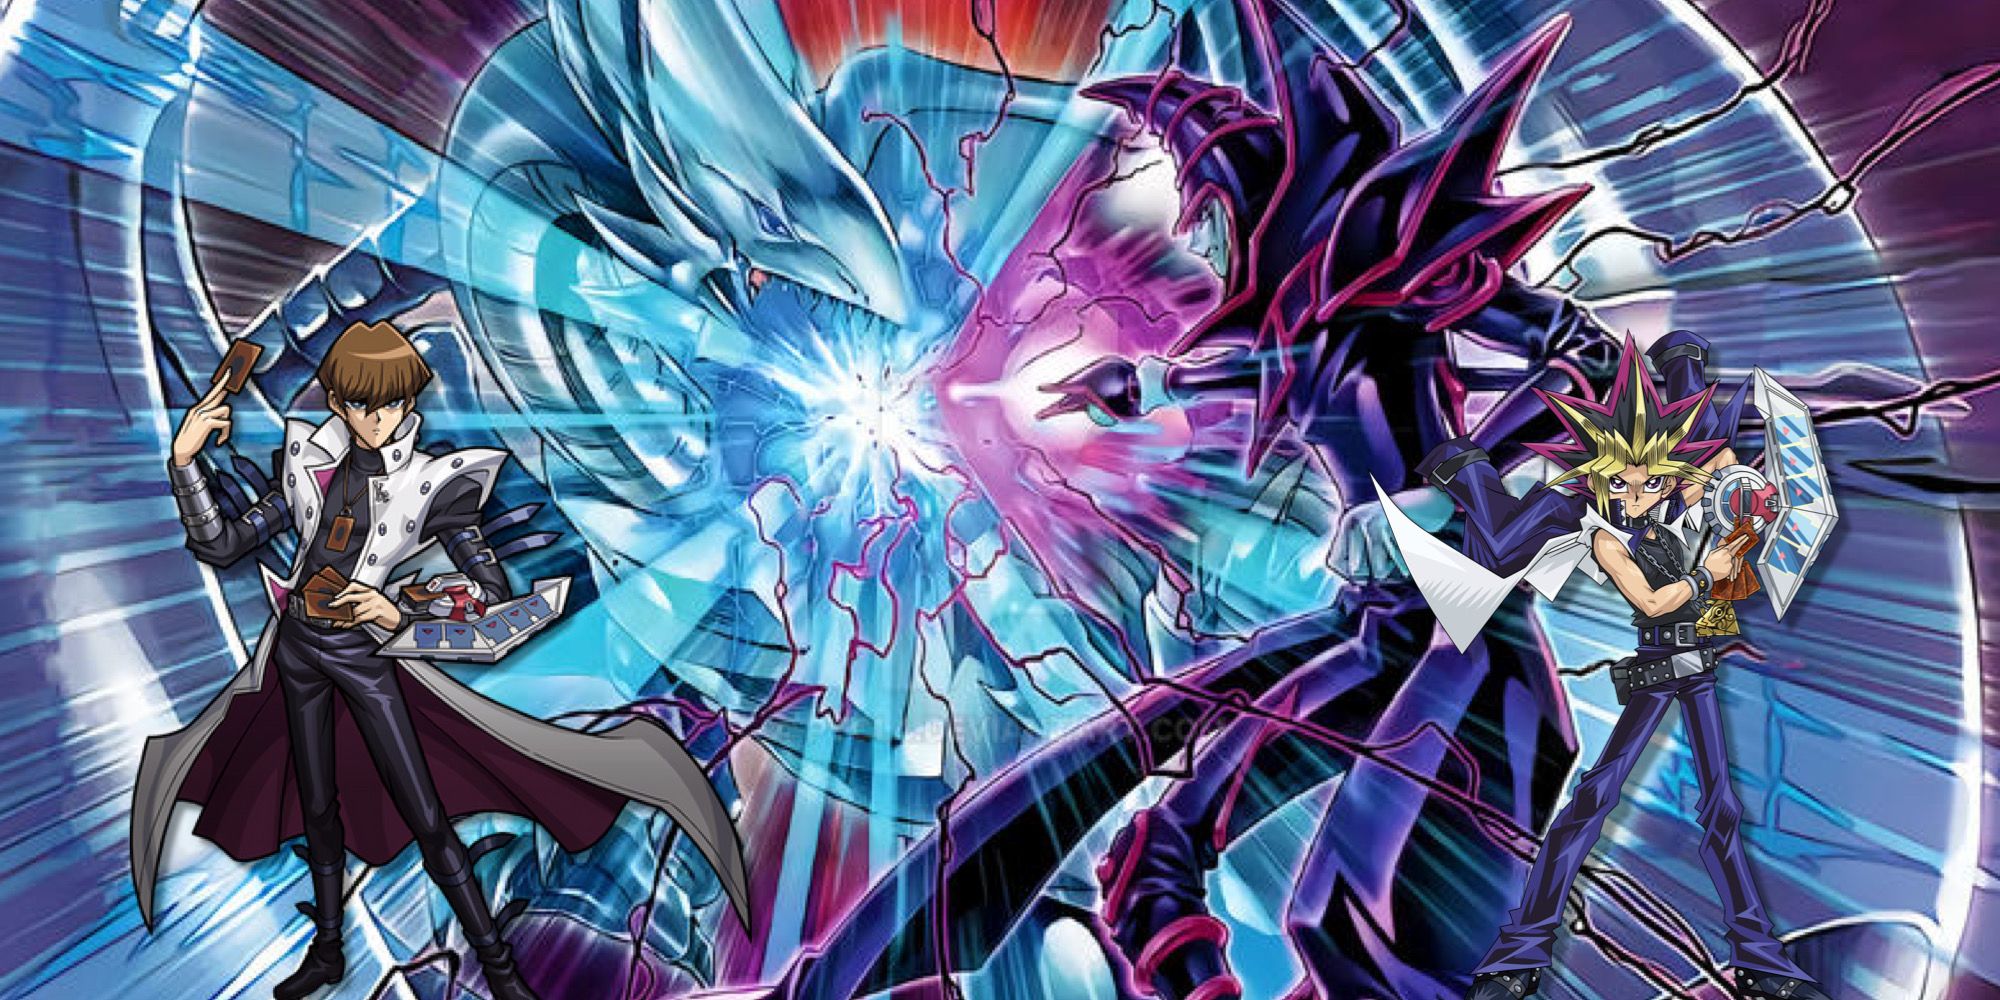 seto kaiba and atem in front of yugioh card artwork for destined rivals